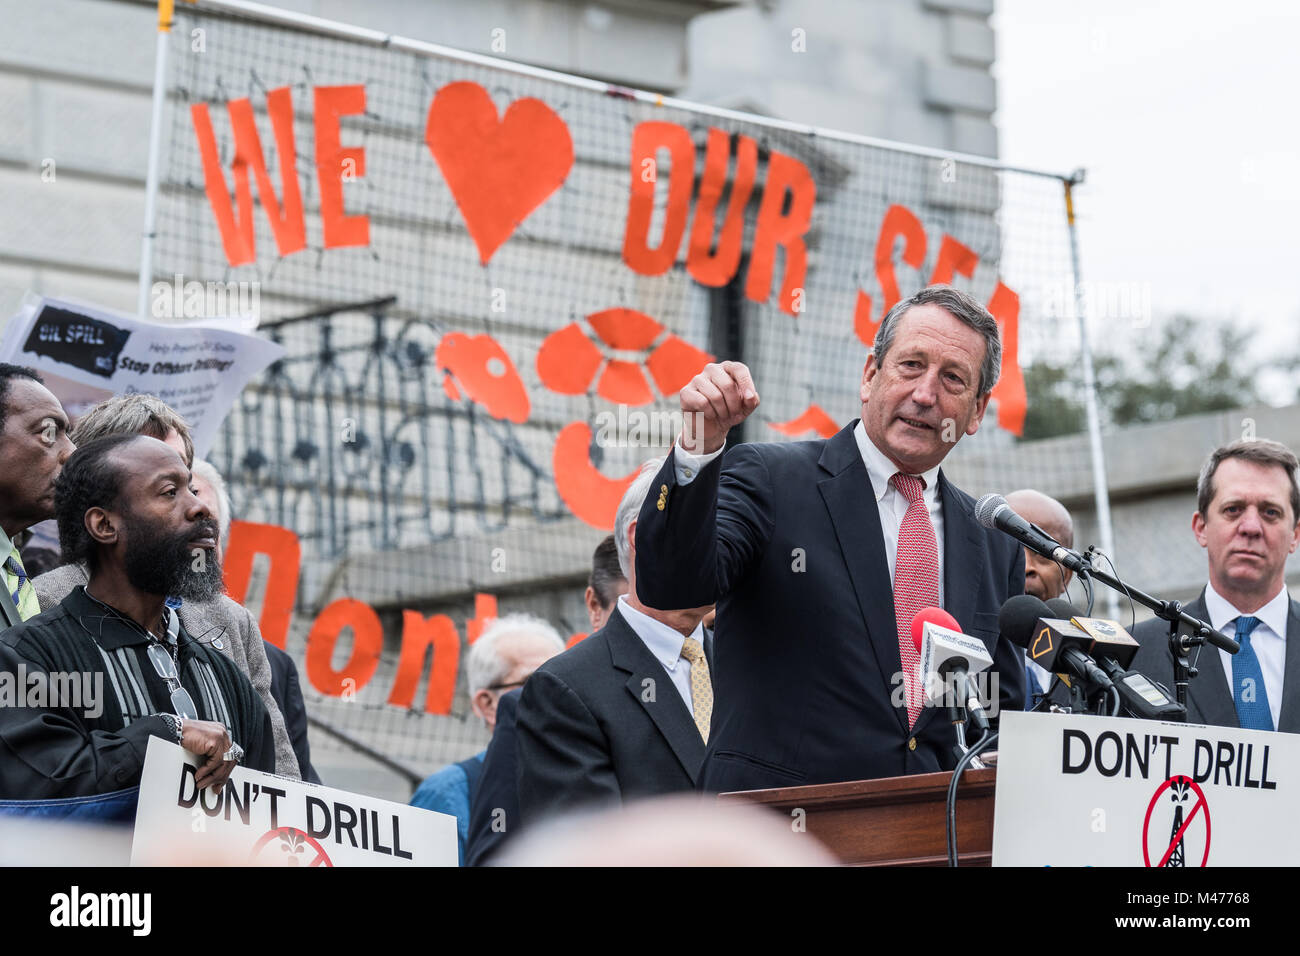 Columbia, South Carolina, USA -  February 13, 2018: Former South Carolina Governor Mark Sanford (R-SC) denounces the Trump administration's potential expansion of oil drilling in the Northern Atlantic Ocean while speaking during a rally against off-short drilling held at the South Carolina State House. Credit: Crush Rush/Alamy Live News Stock Photo